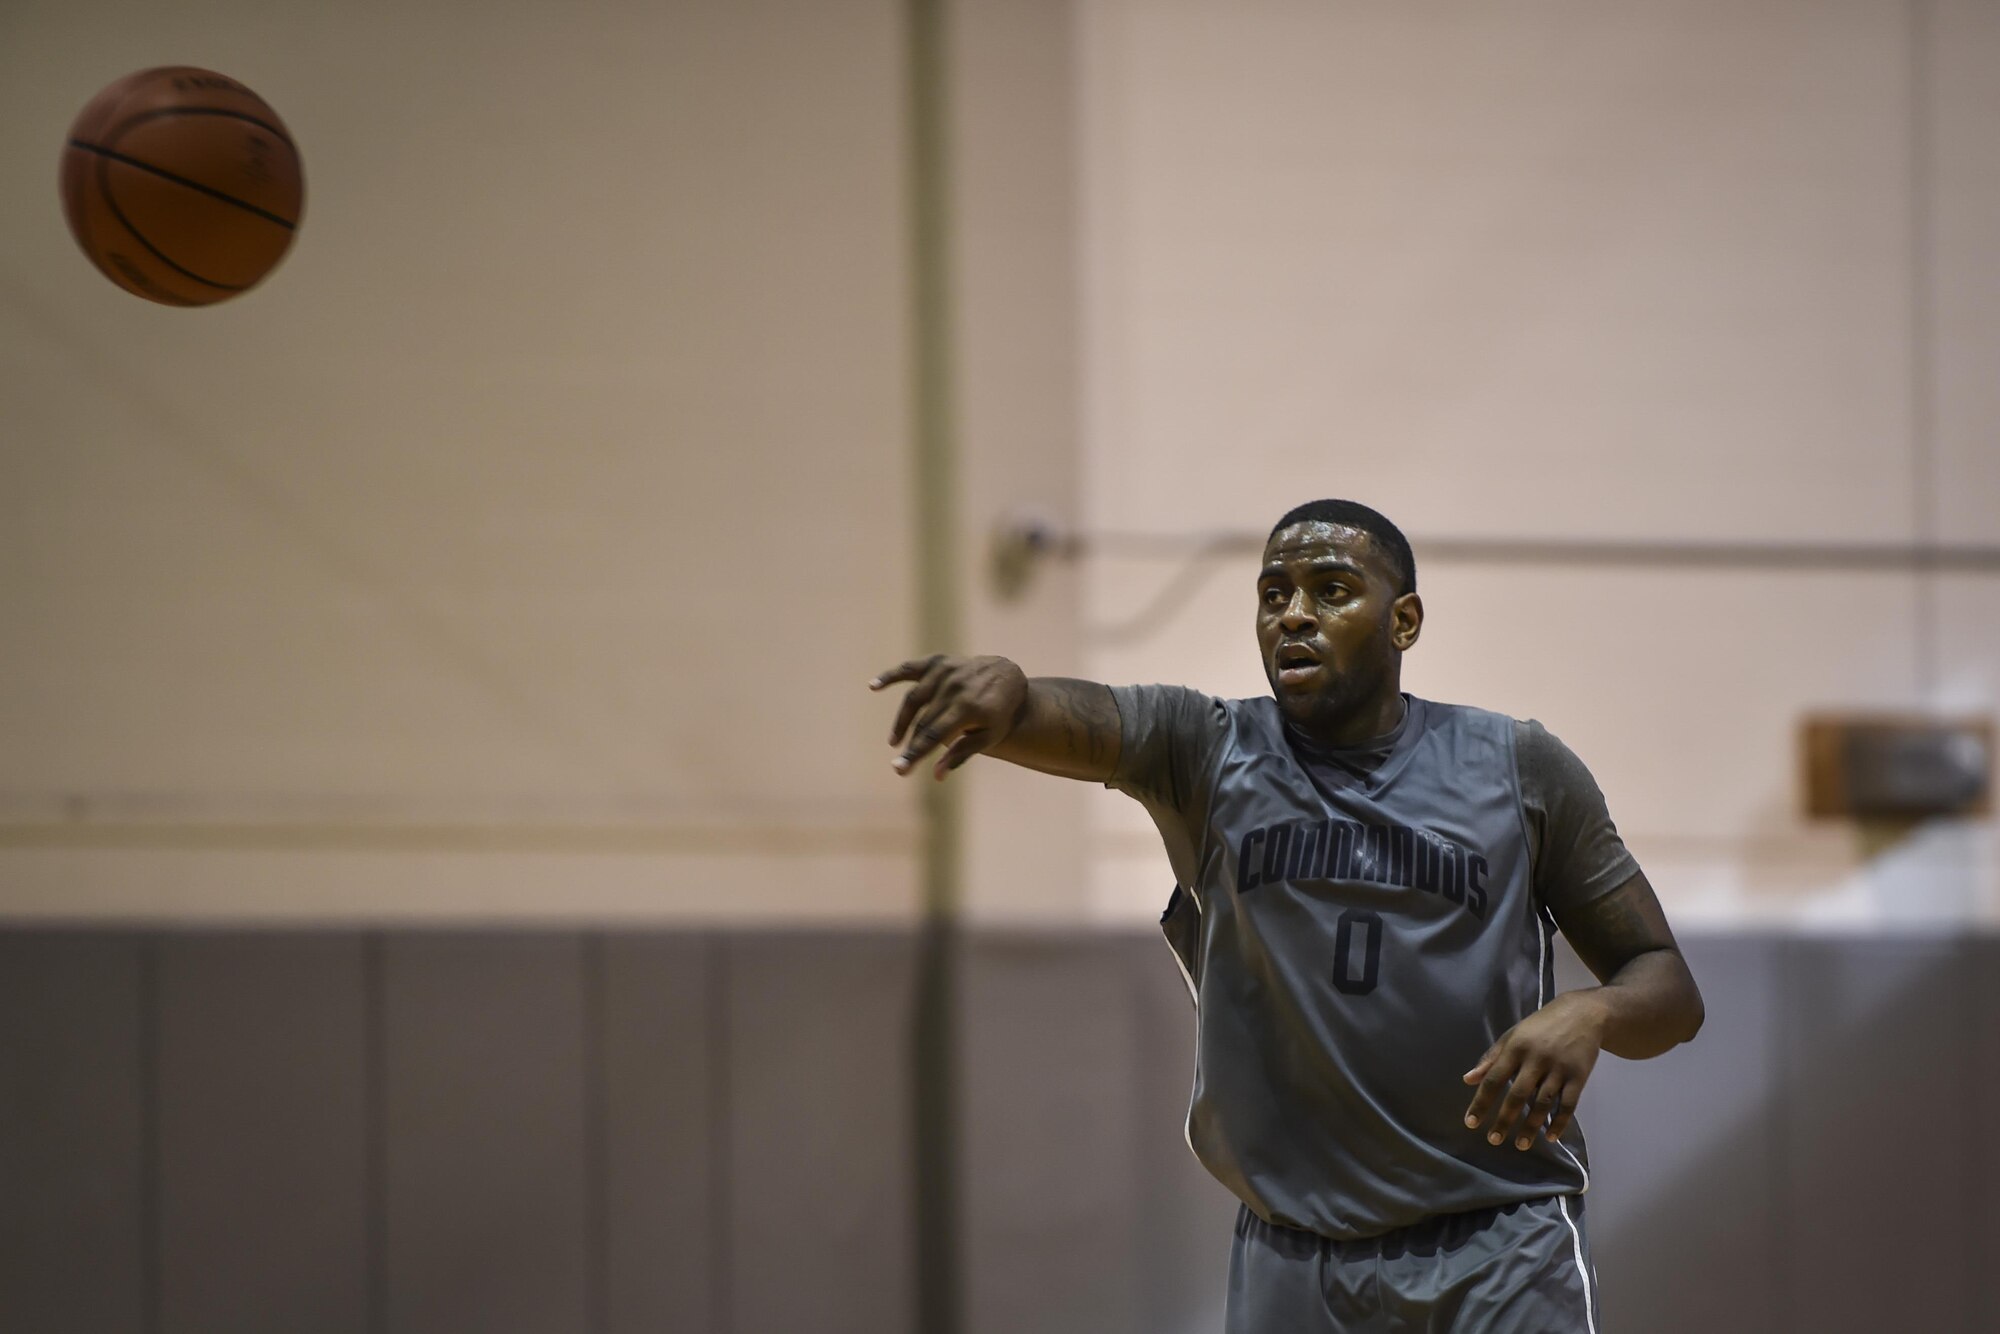 Brian Washington, a member of Hurlburt Field’s basketball team, passes a ball during a basketball tournament at the Aderholt Fitness Center on Hurlburt Field, Fla., Jan. 15, 2017. Eight Air Force teams from nearby bases competed in the two-day, double-elimination tournament. Hurlburt Field finished second in the championship game against Maxwell Air Force Base in the 2nd annual Martin Luther King Jr. Day tournament. (U.S. Air Force photo by Airman 1st Class Joseph Pick)